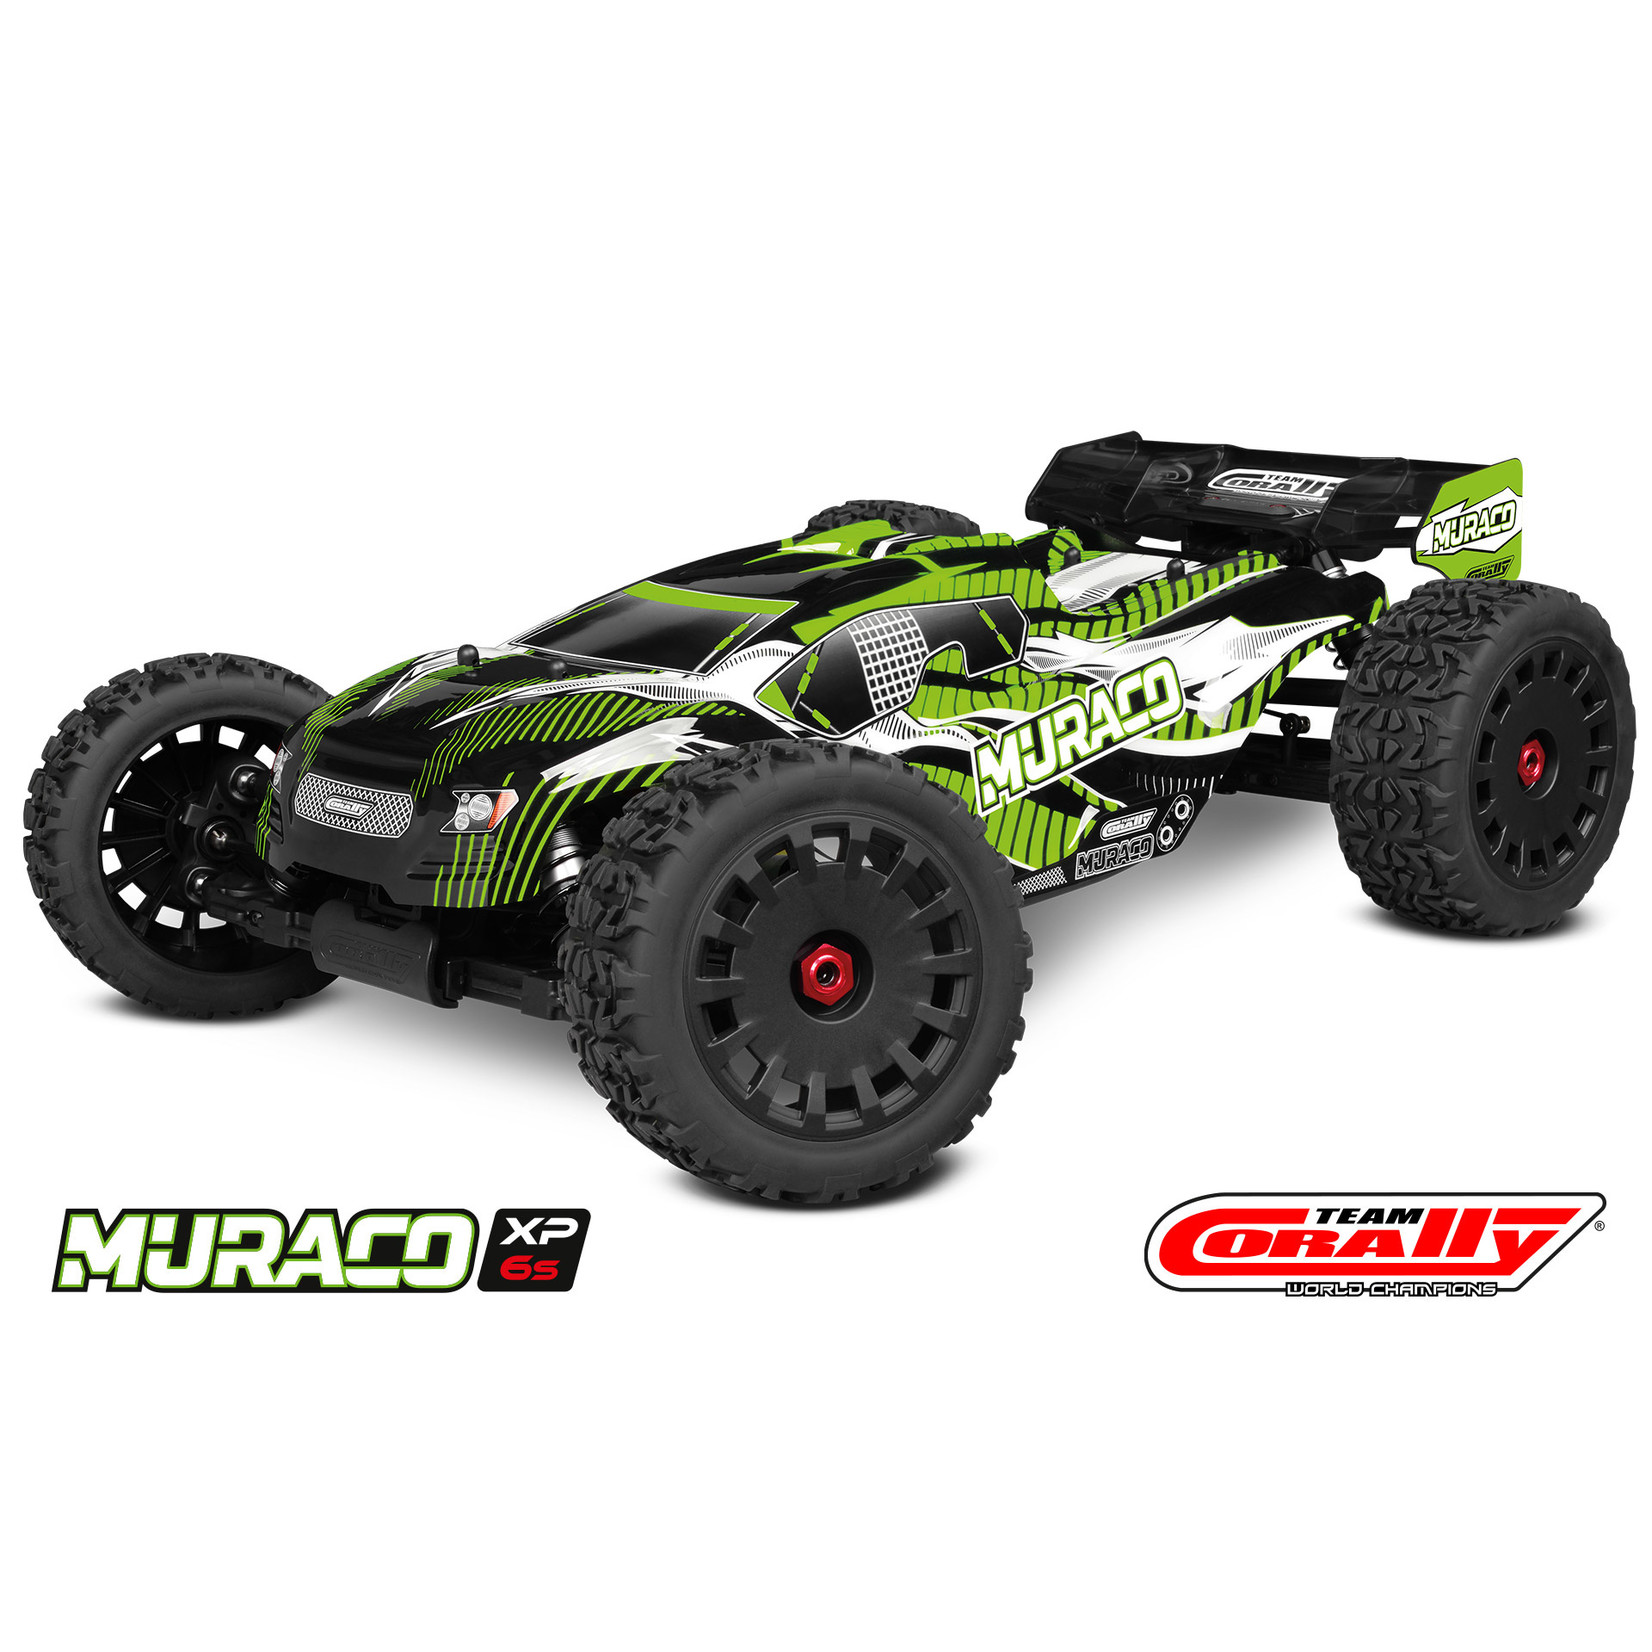 Corally (Team Corally) Muraco XP 6S 1/8 Truggy LWB RTR Brushless Power 6S